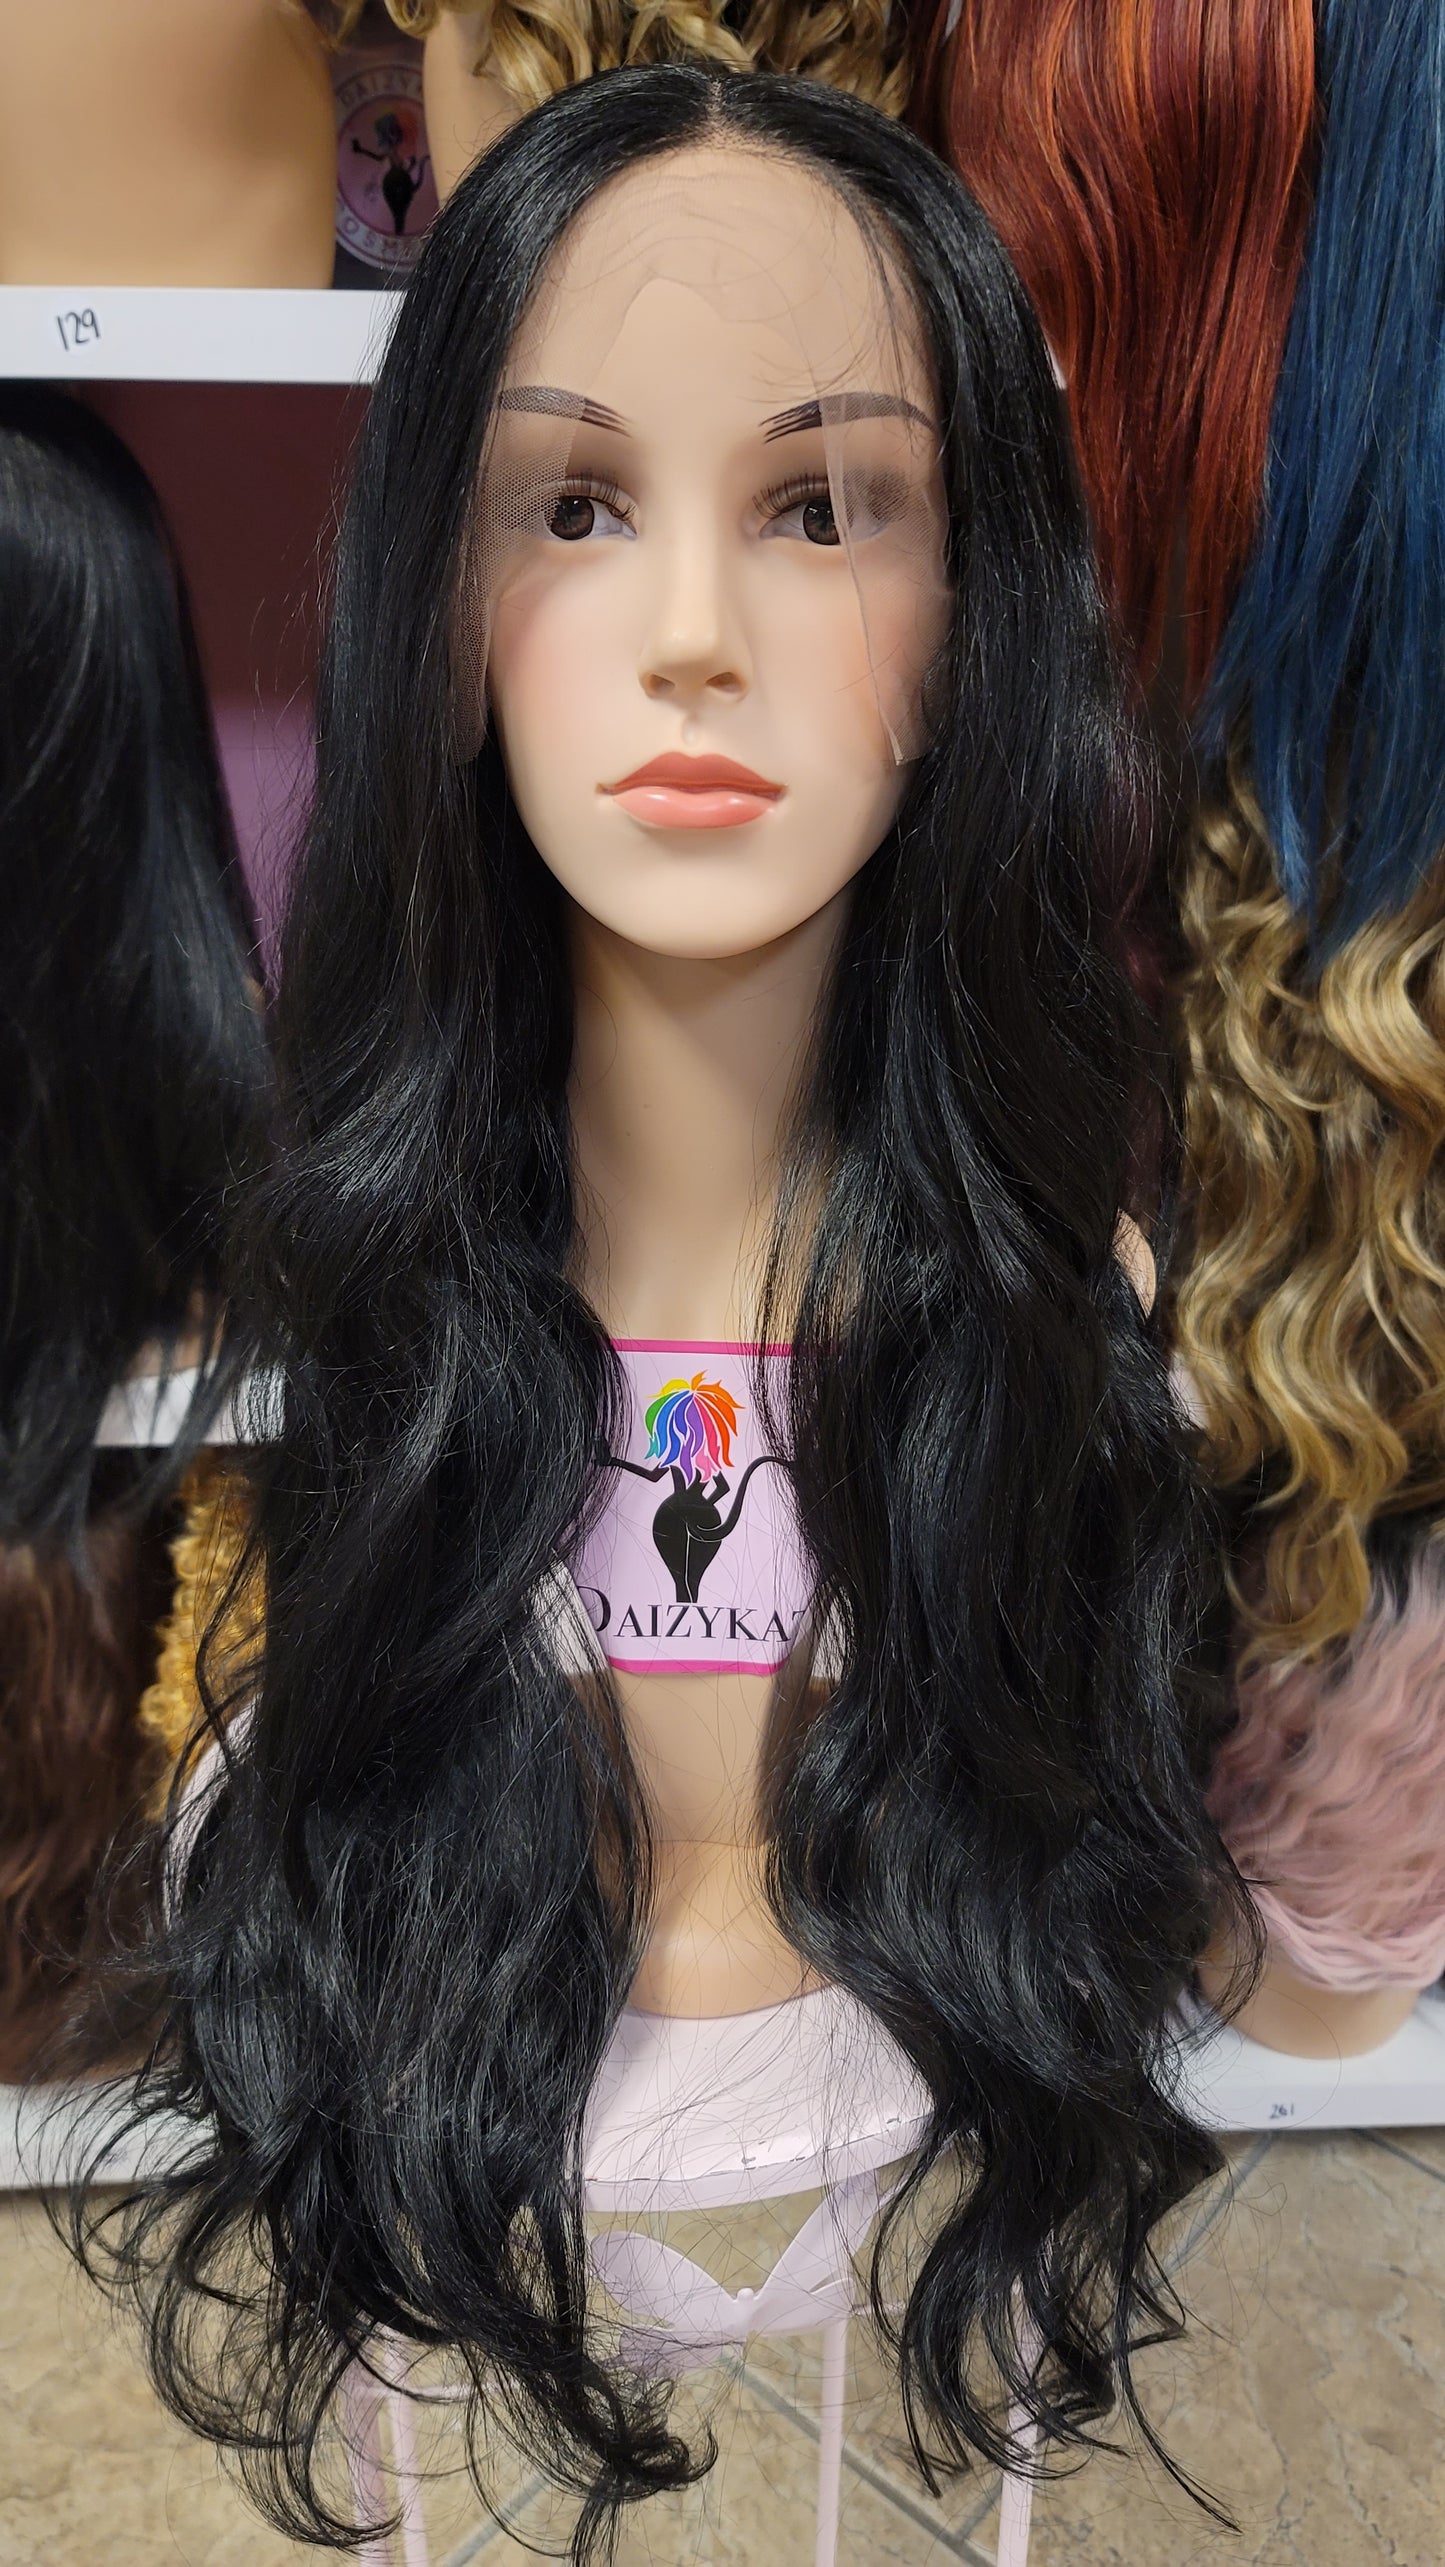 336 Sloan - Middle Part Lace Front Wig - 1B - DaizyKat Cosmetics 336 Sloan - Middle Part Lace Front Wig - 1B DaizyKat Cosmetics Wigs